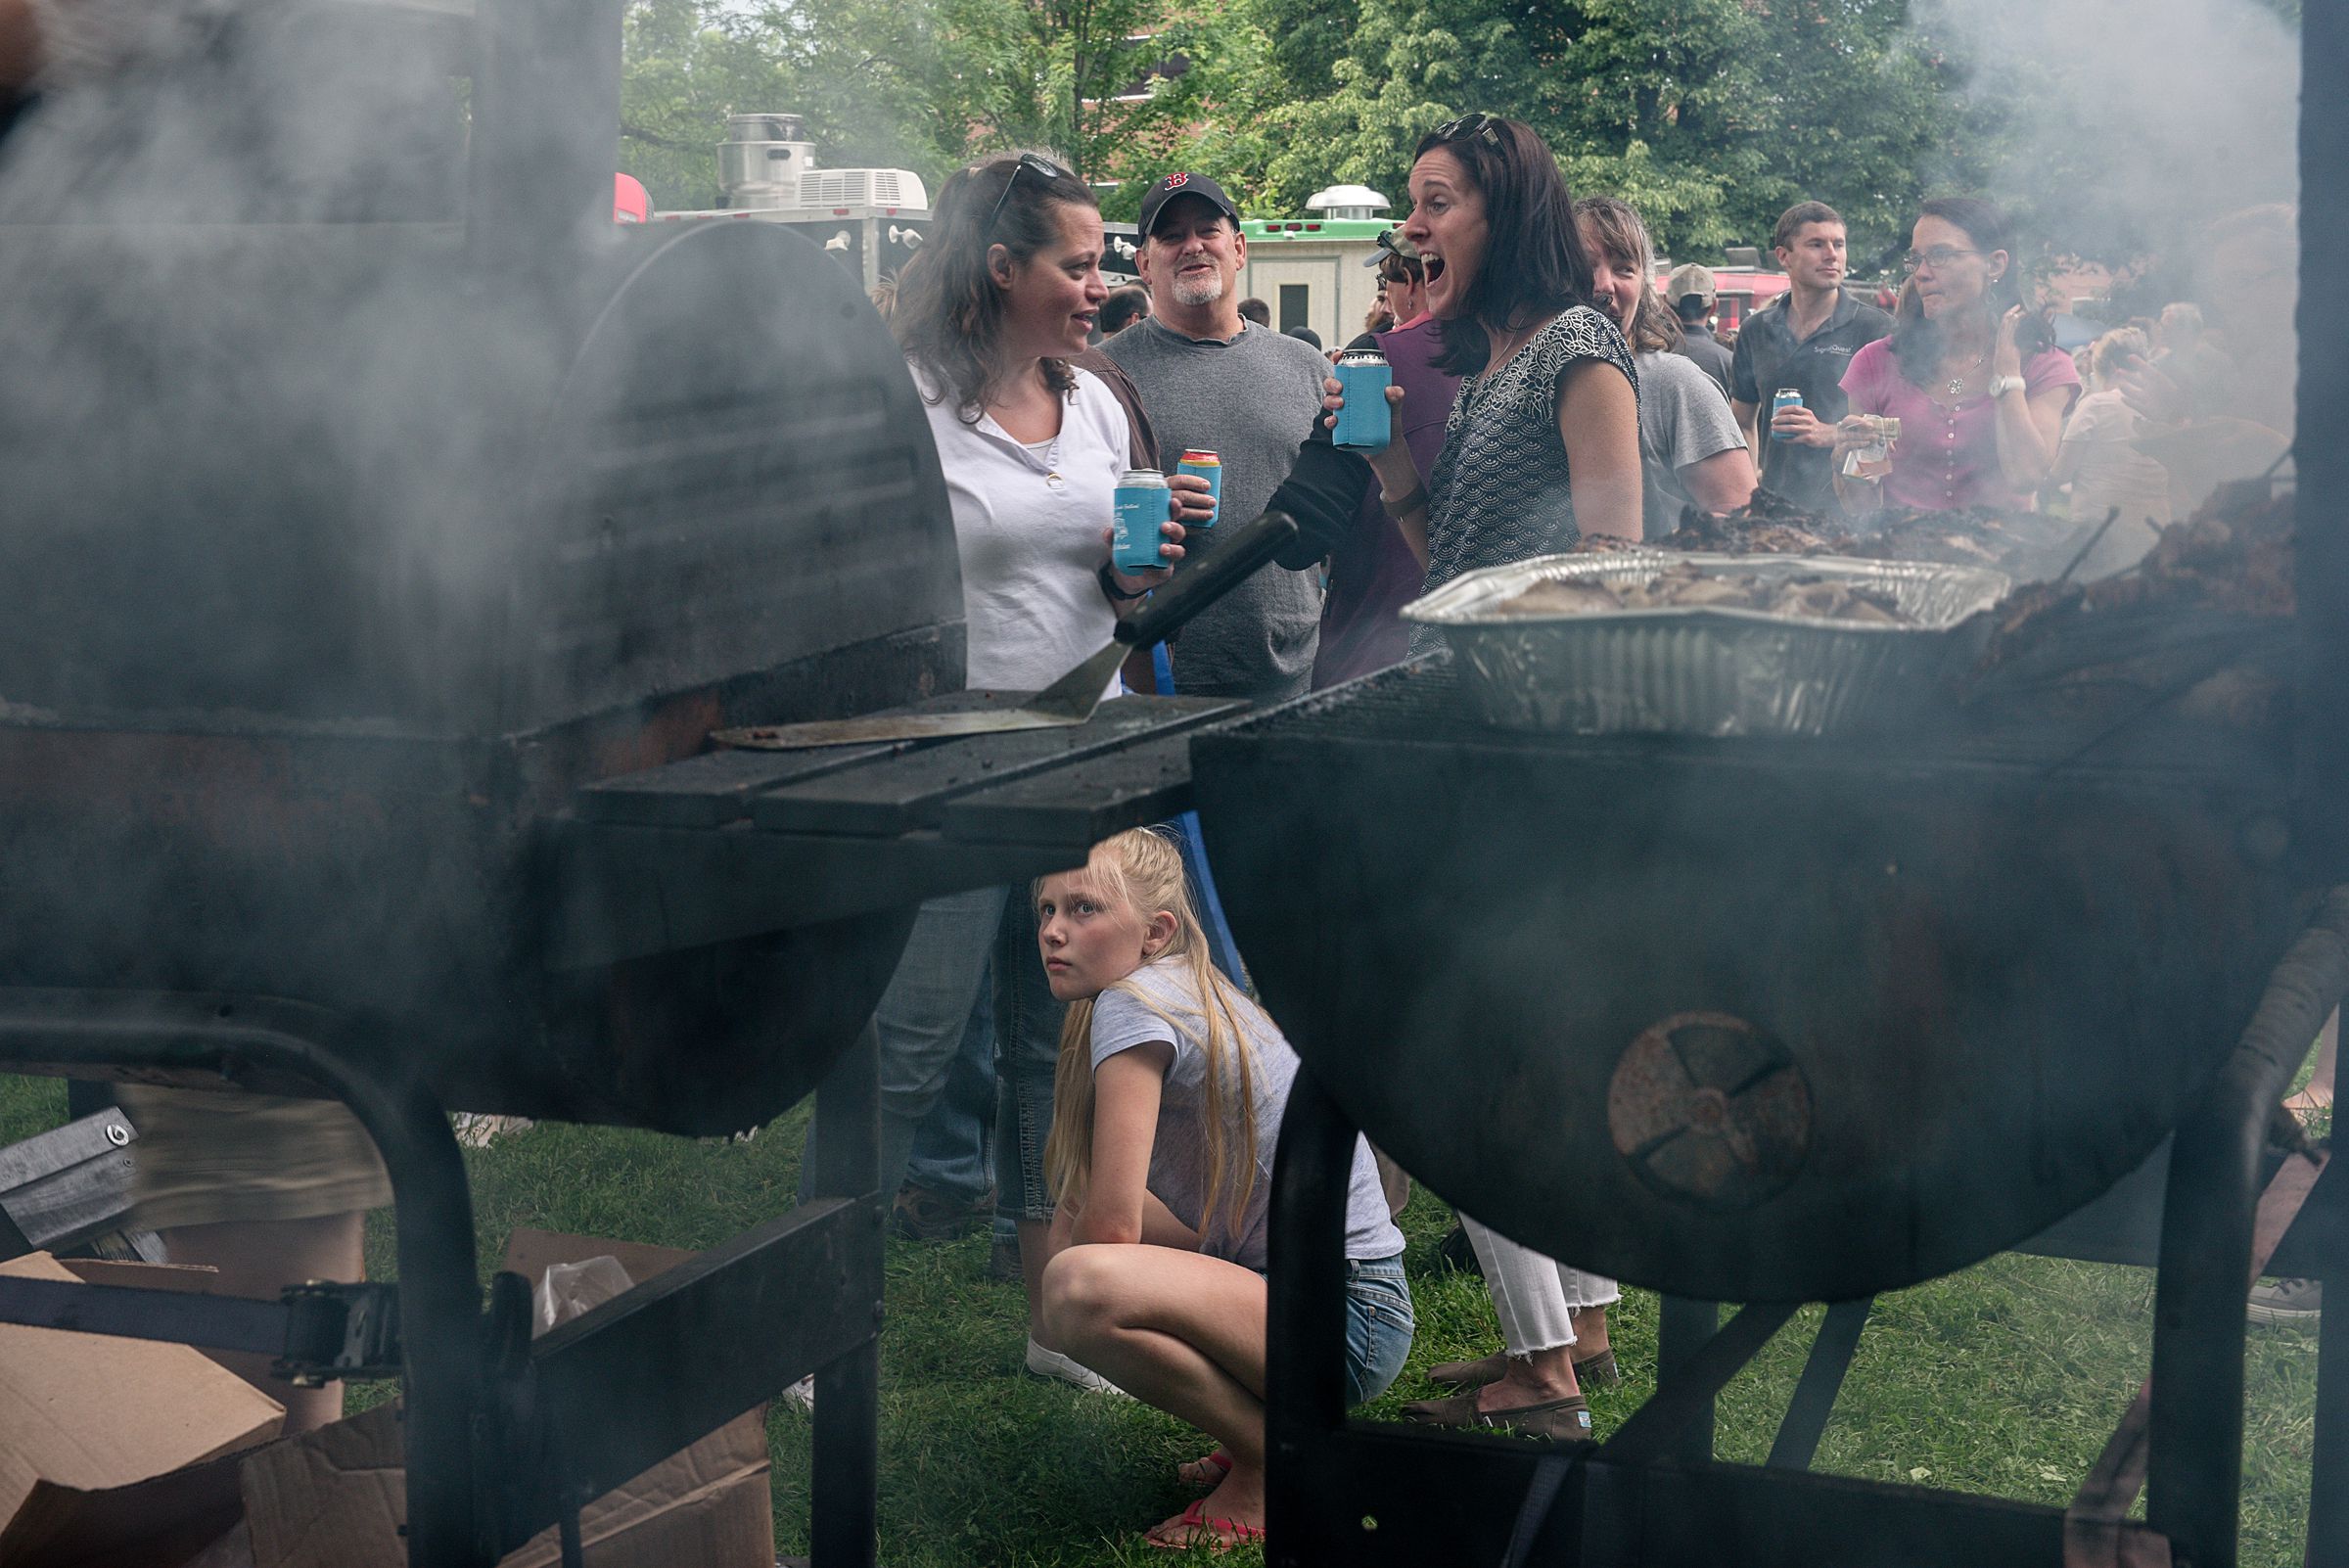 Customers wait in line at Boogalow's Island BBQ during the Lebanon (N.H.) Food Truck Festival in Colburn Park, Friday, June 21, 2019. (Valley News - James M. Patterson) Copyright Valley News. May not be reprinted or used online without permission. Send requests to permission@vnews.com.